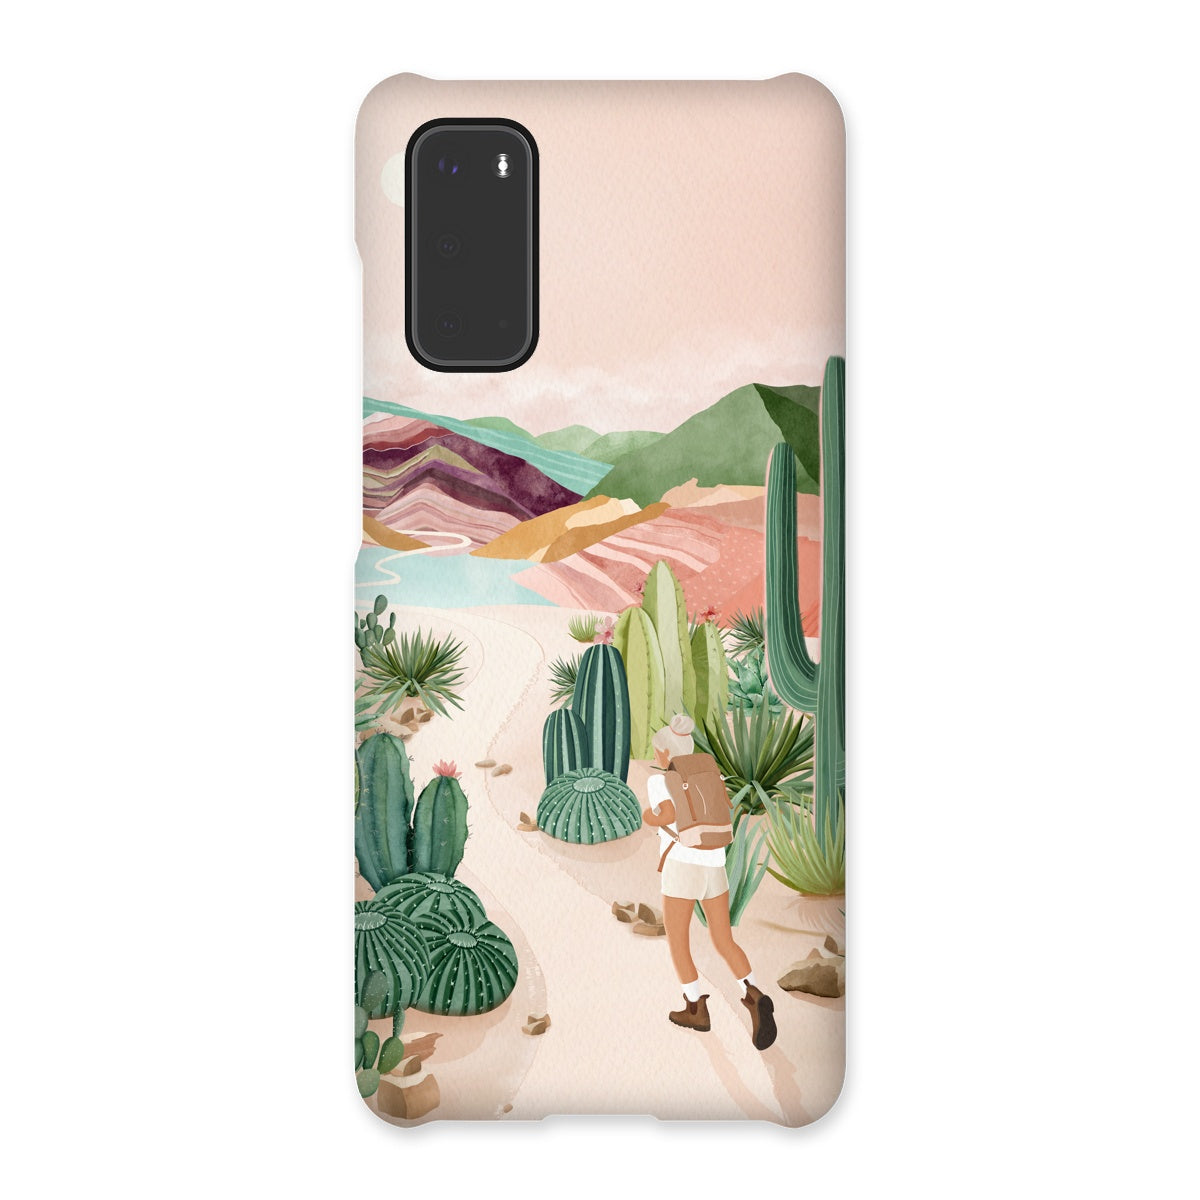 Memory of Argentina Snap Phone Case